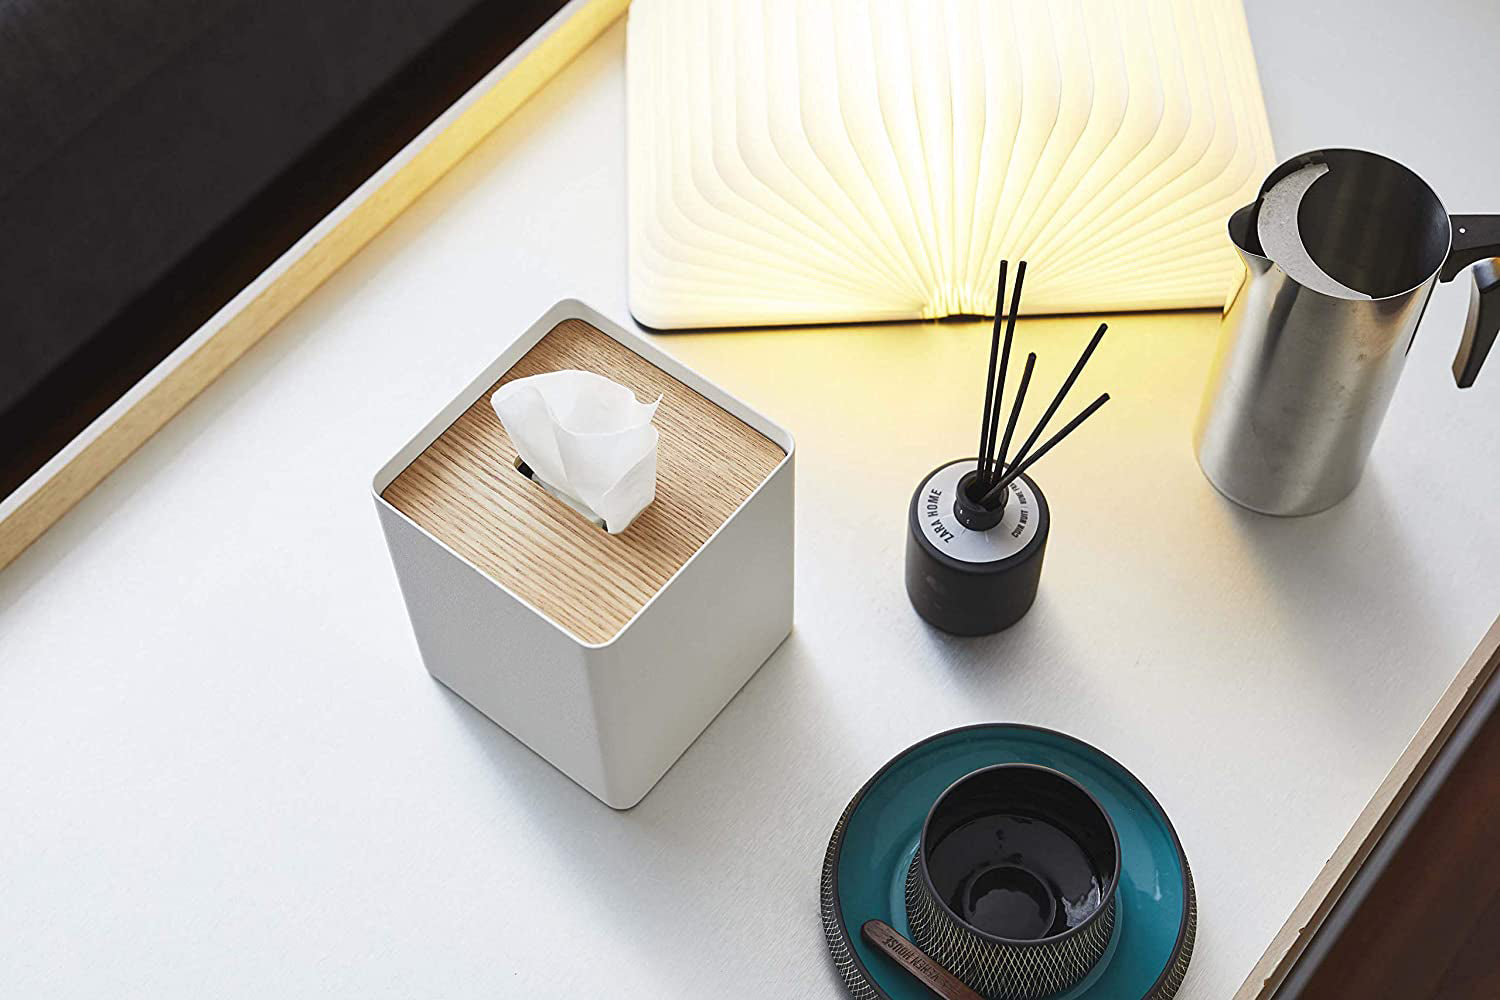 View 7 - Aerial view of white Tissue Case on table next to book light, cup, and décor pieces by Yamazaki Home.